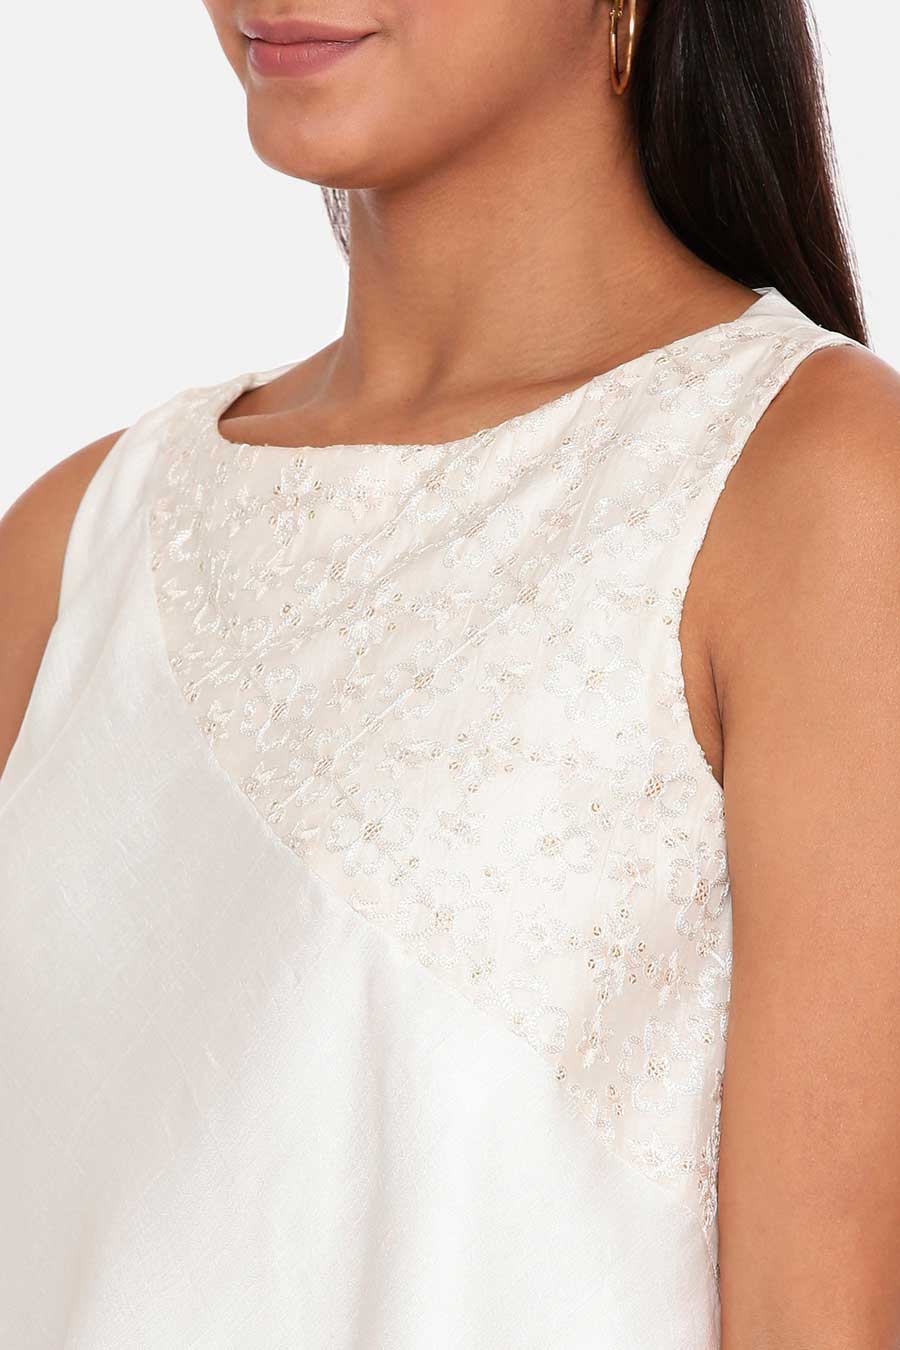 White Embroidered Top